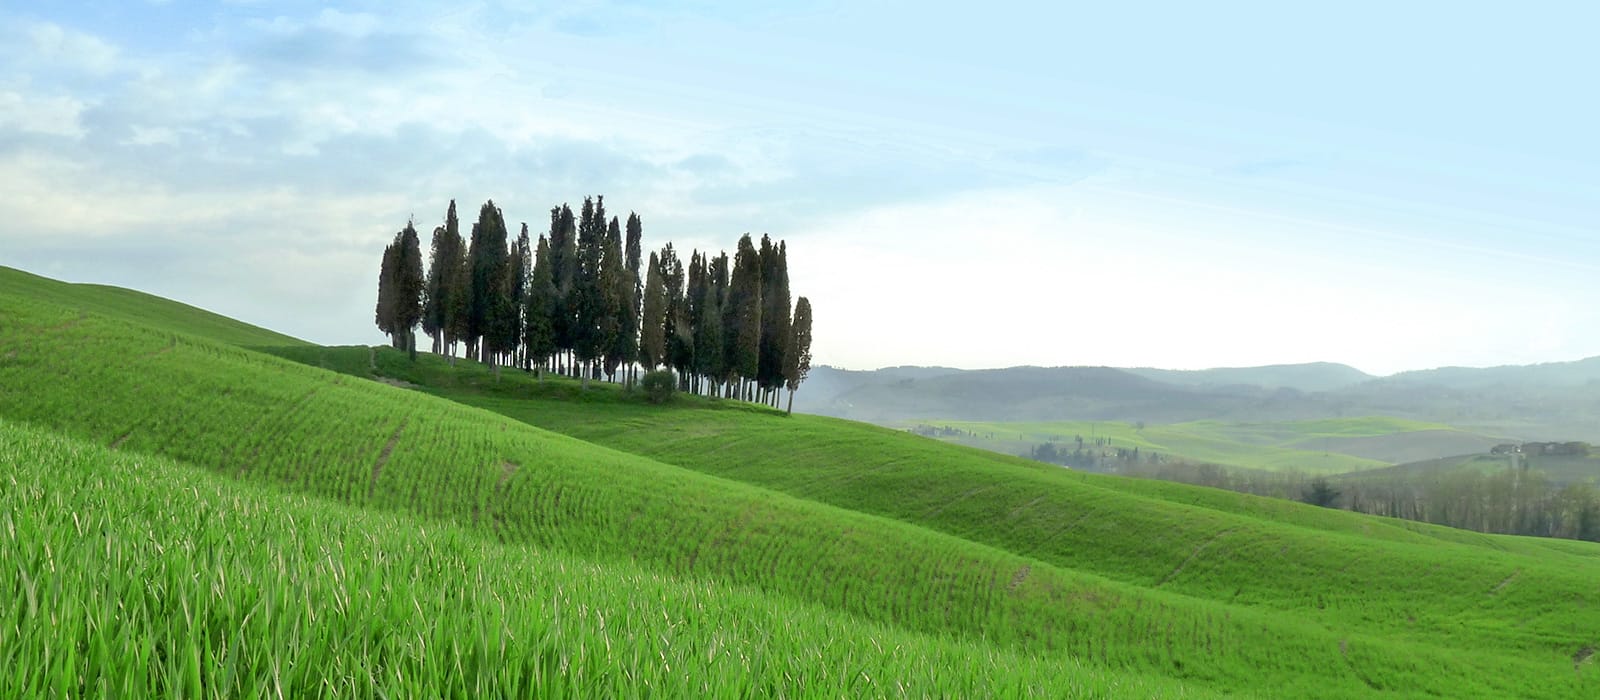 What to see in the surroundings of Agriturismo Pratovalle near Cortona